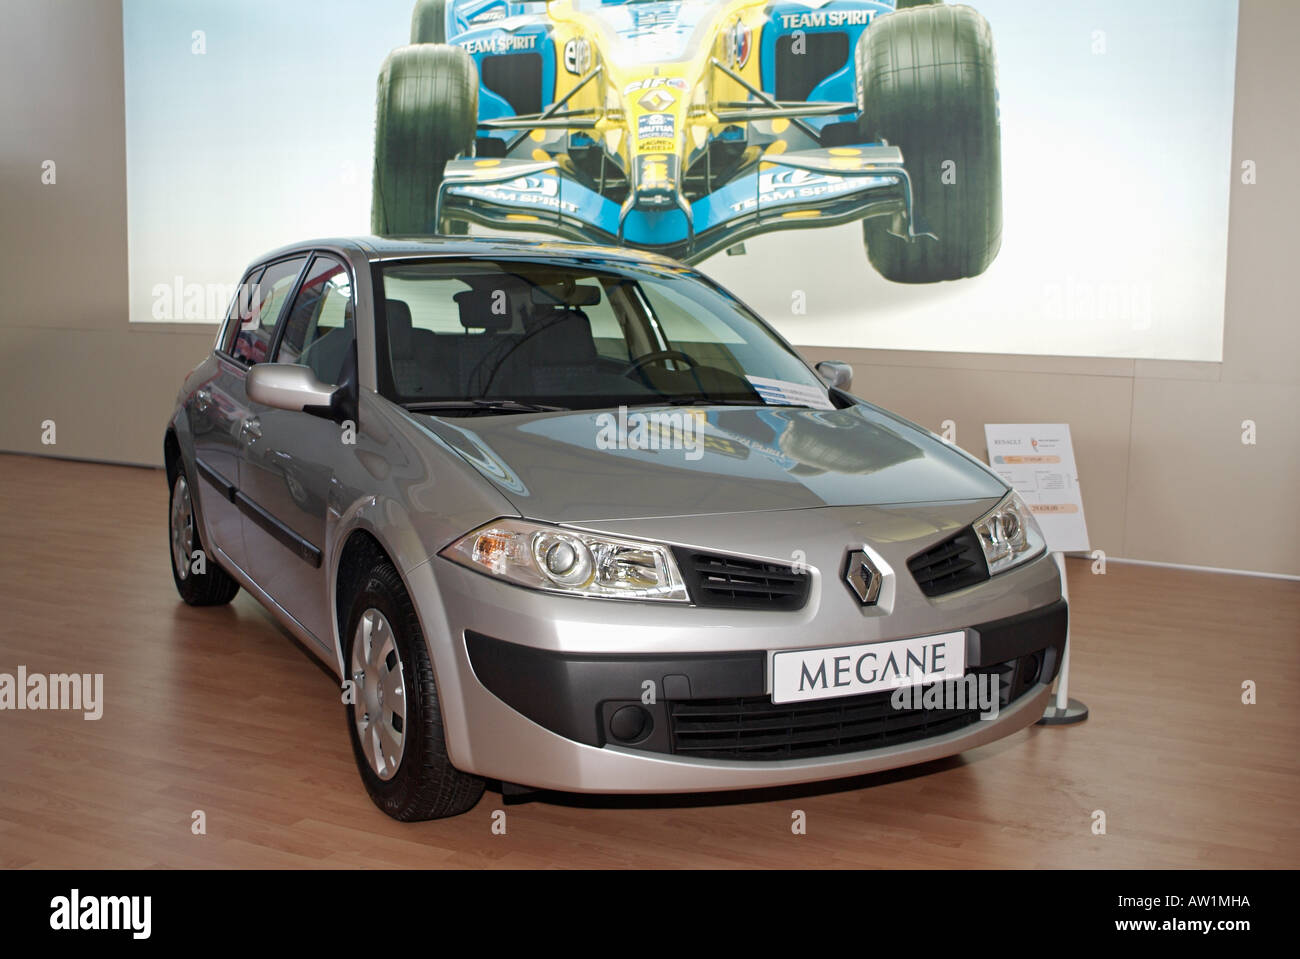 Renault Megane on Display In a Car Showroom Stock Photo